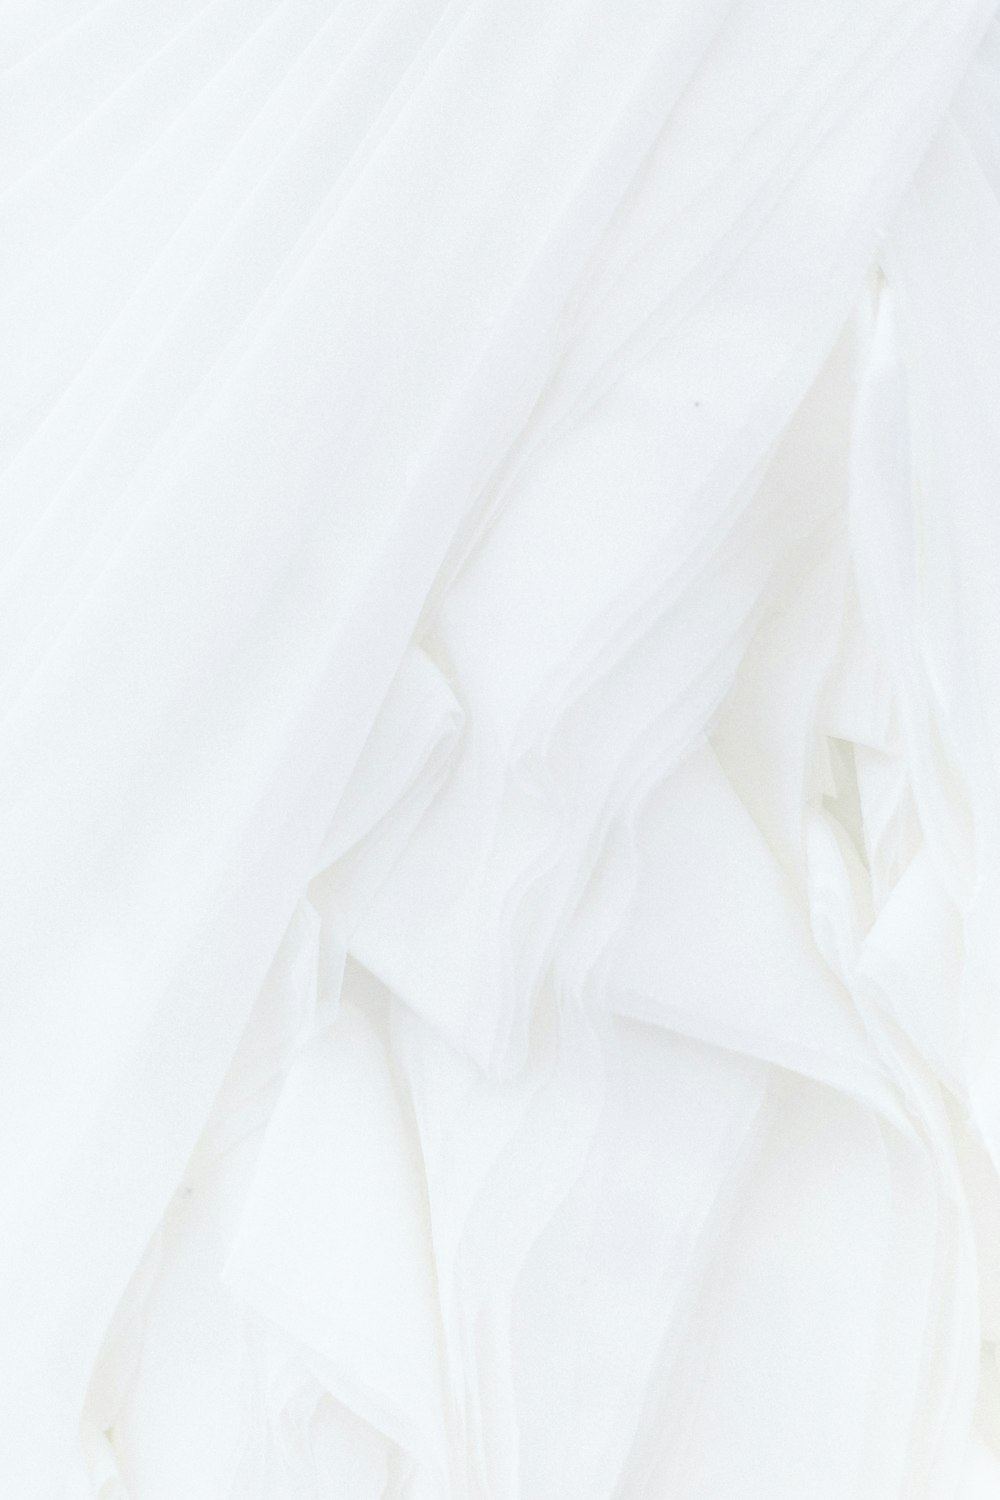 White Fabric Pictures | Download Free Images on Unsplash